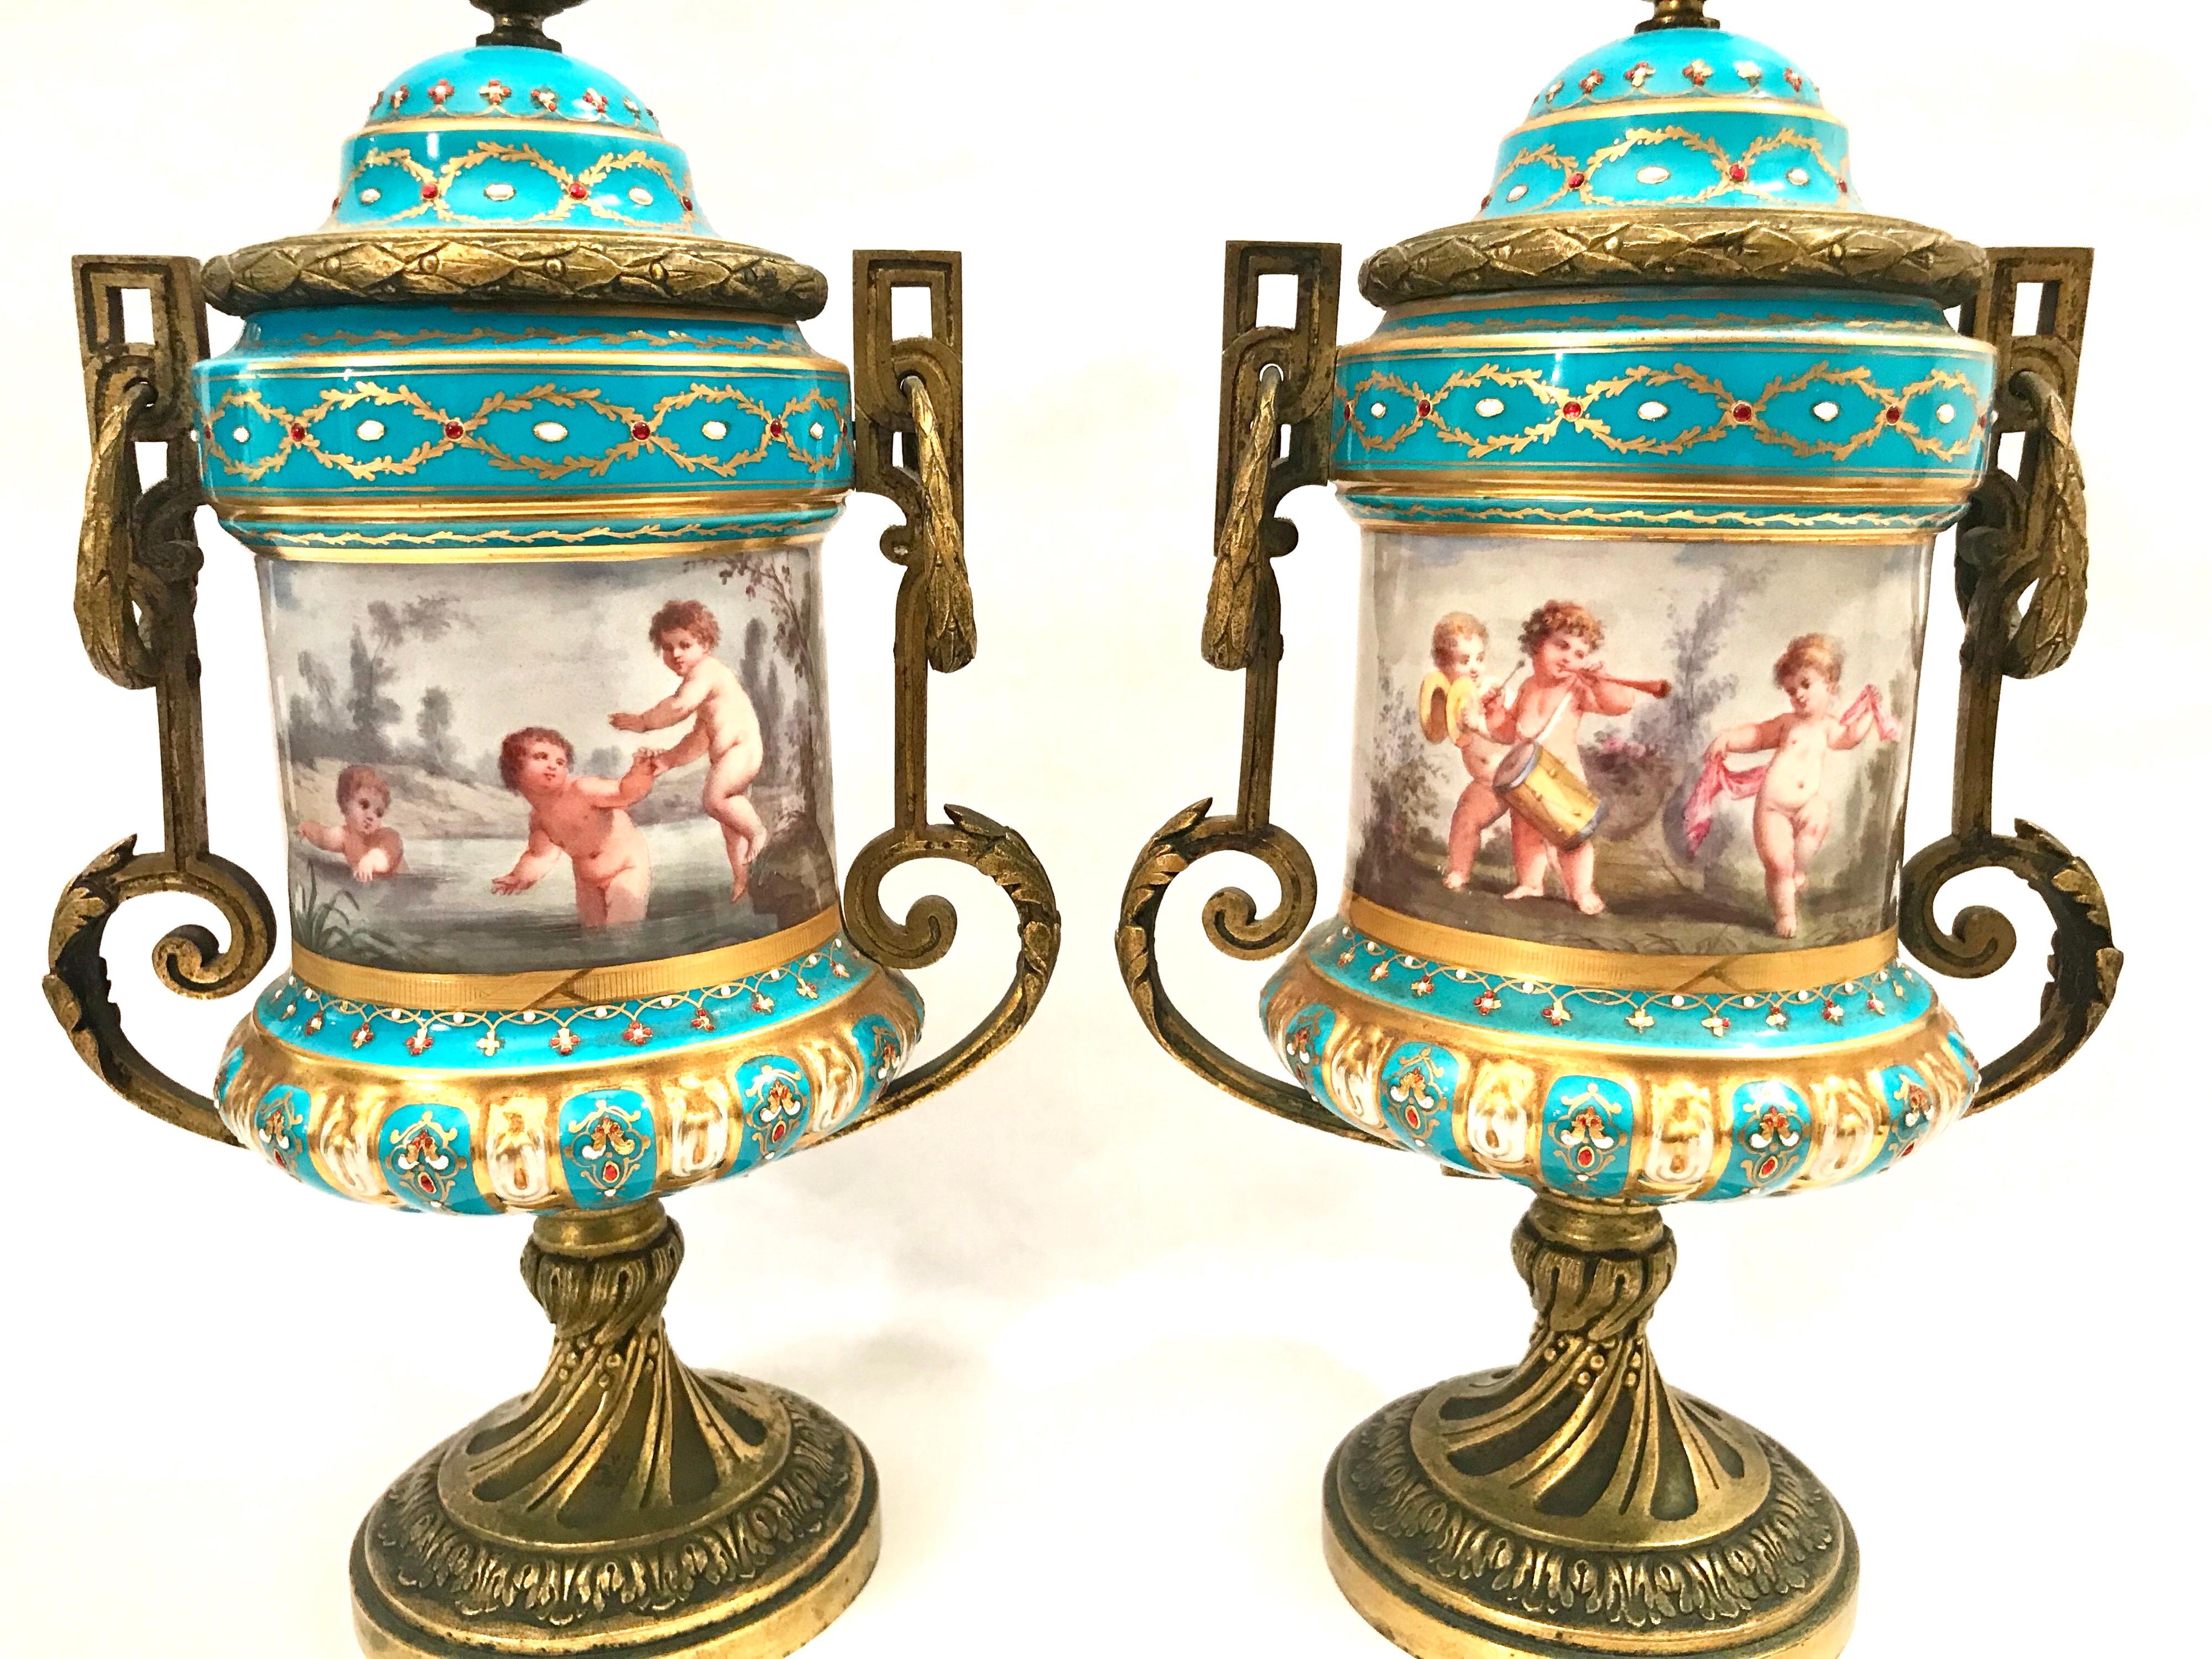 Pair of French Gilt Bronze Mounted Porcelain Lidded Urns For Sale 1